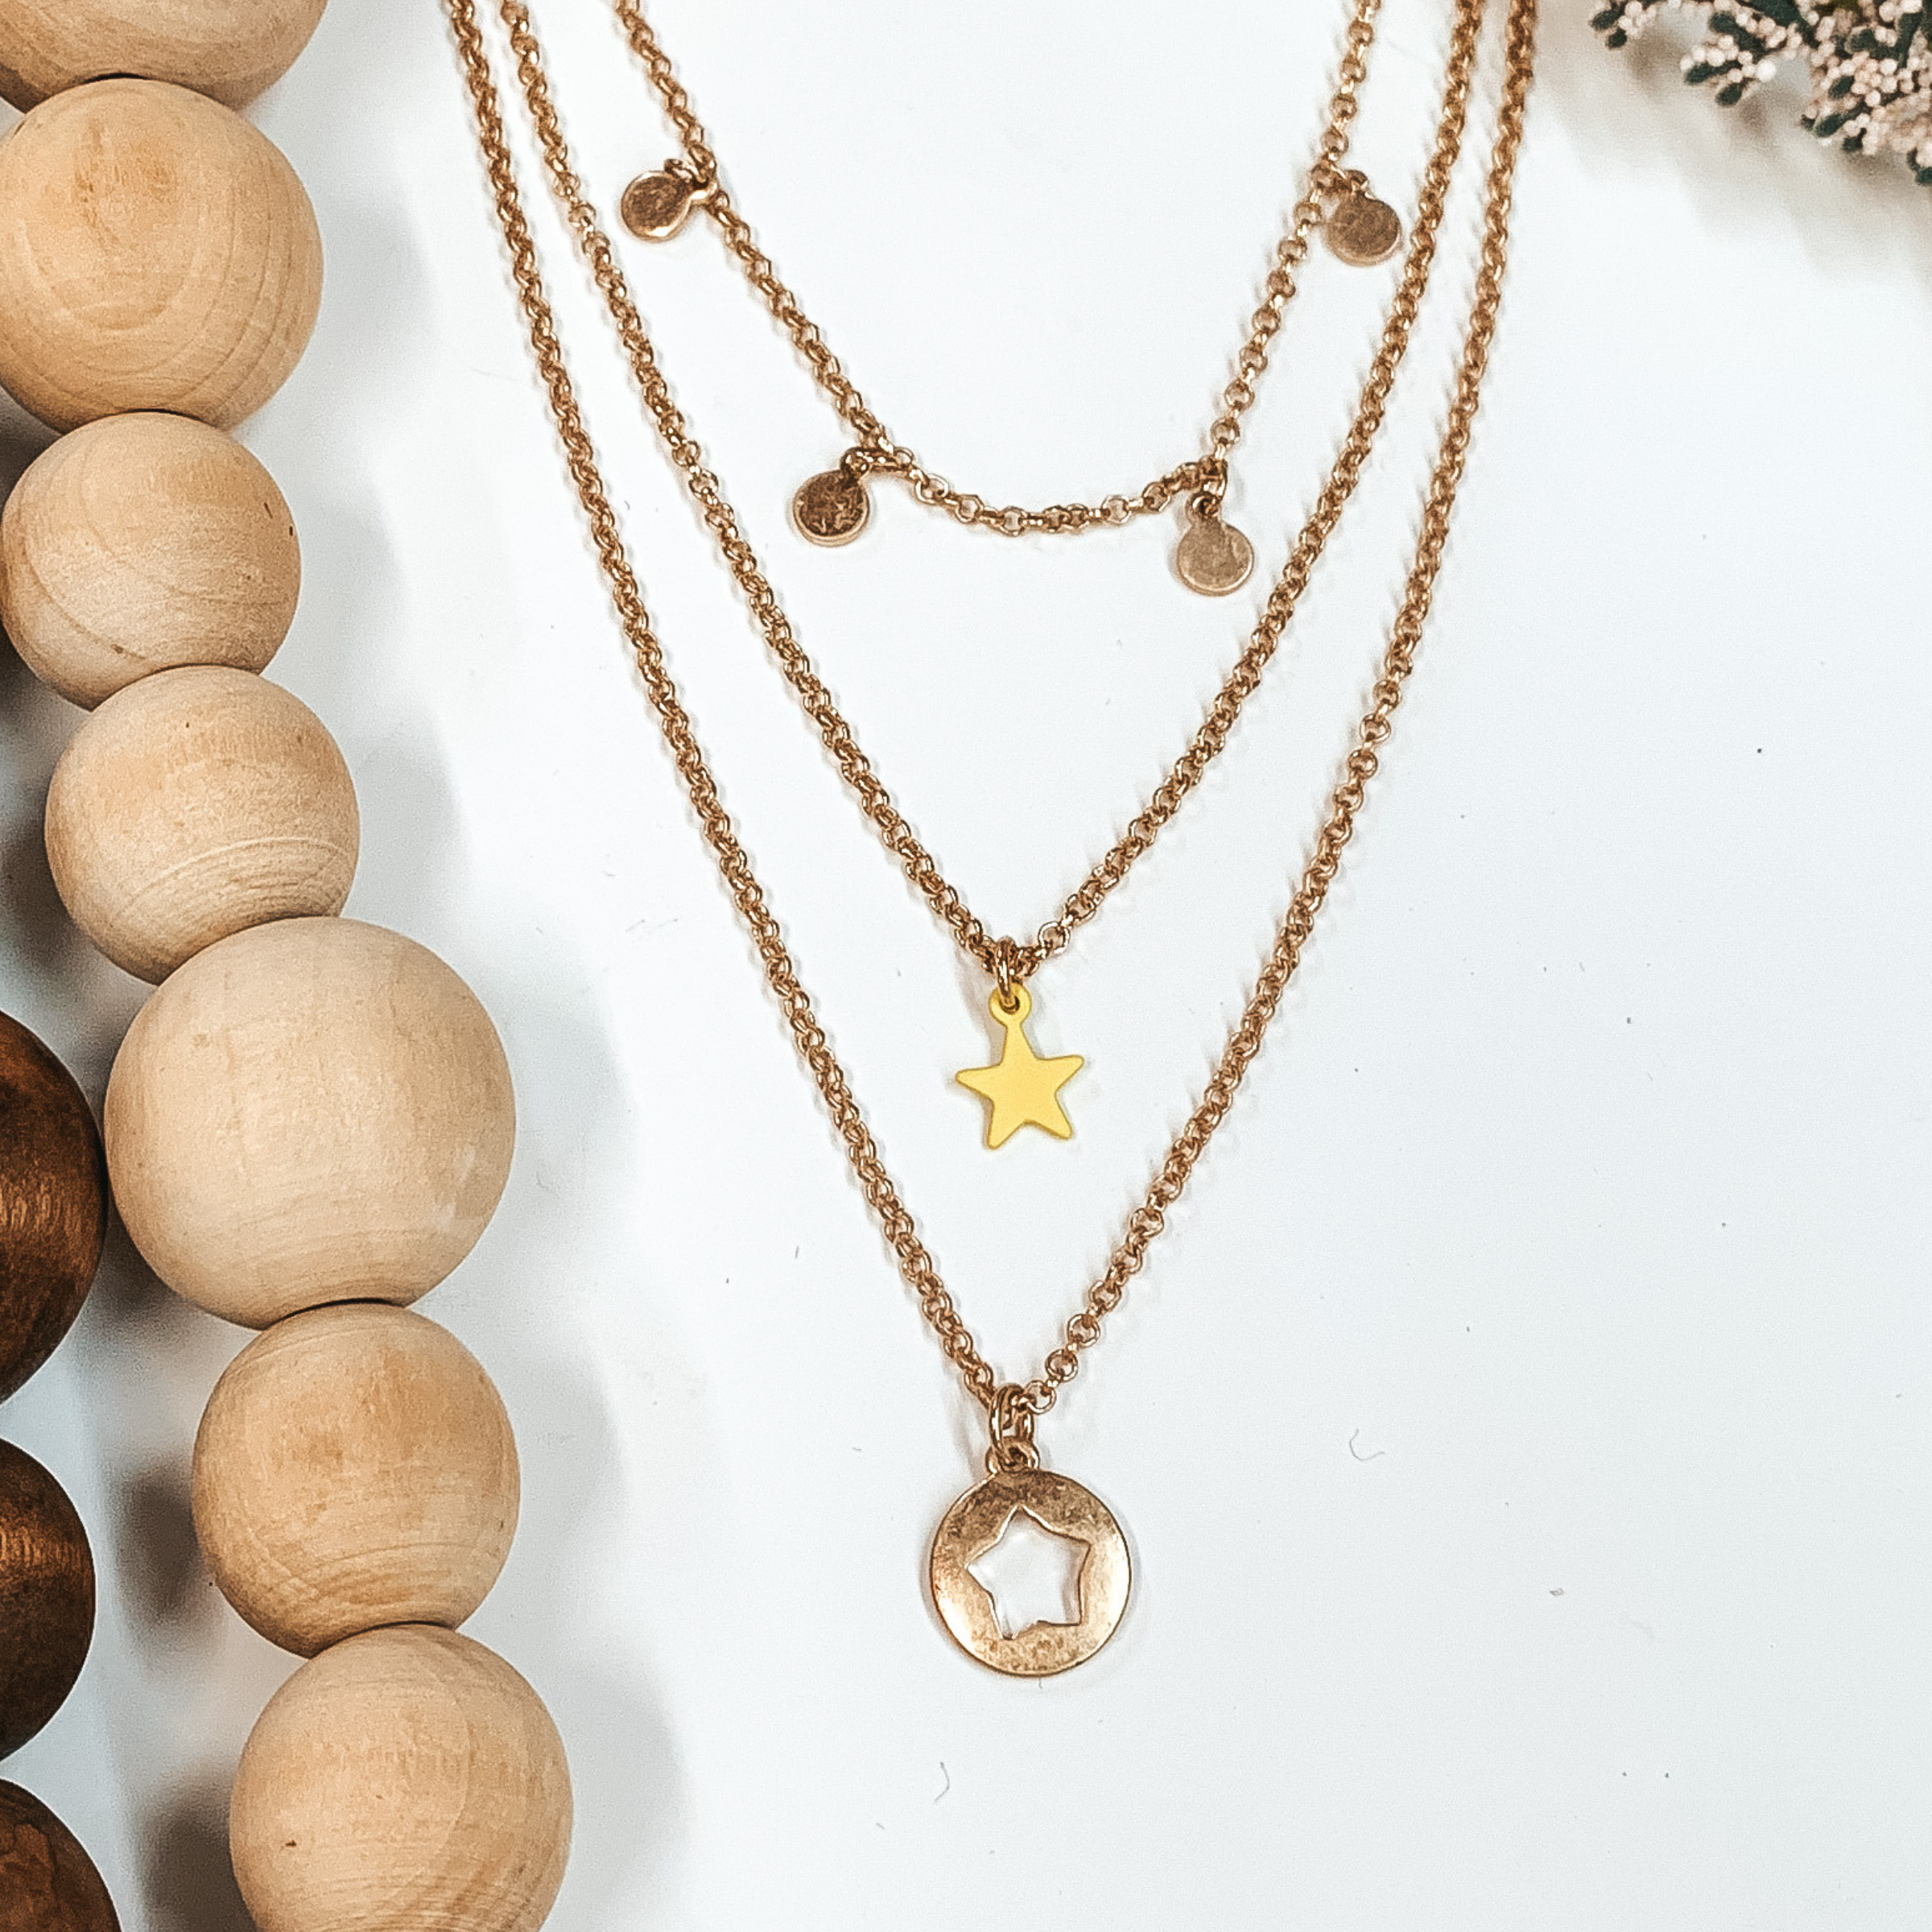 First Star Necklace Set in Gold/Yellow - Giddy Up Glamour Boutique